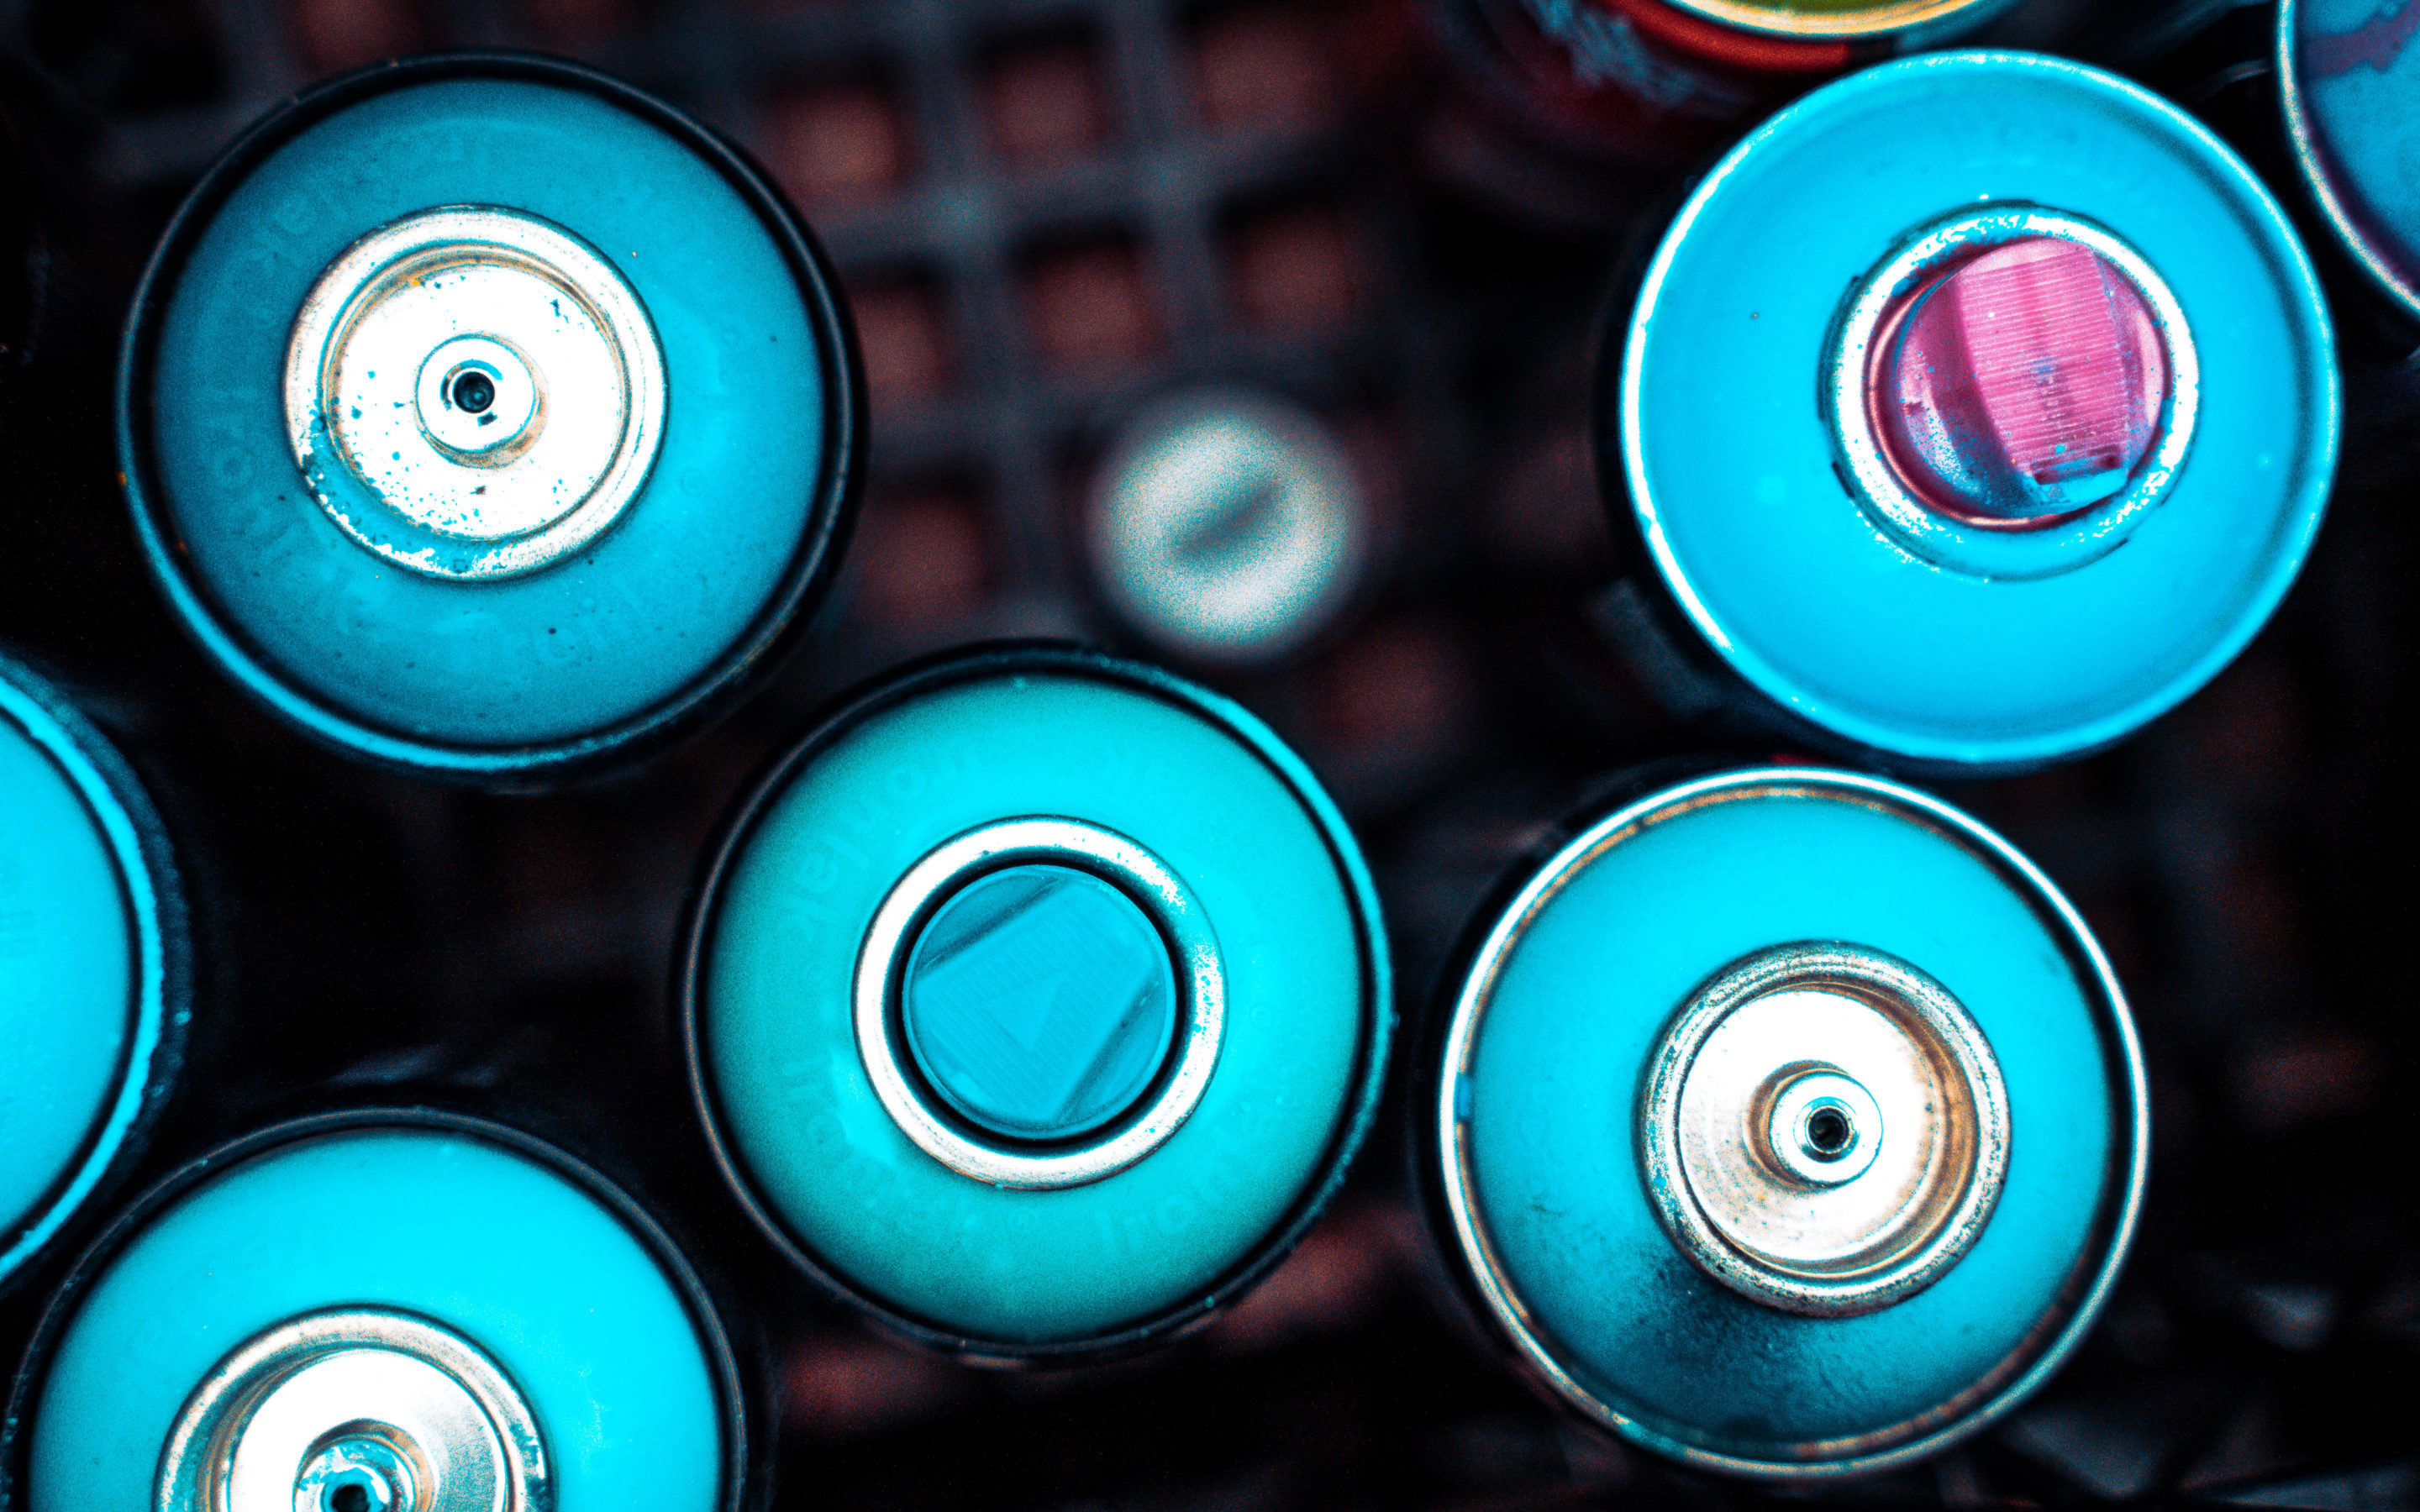 Top of teal spray paint cans